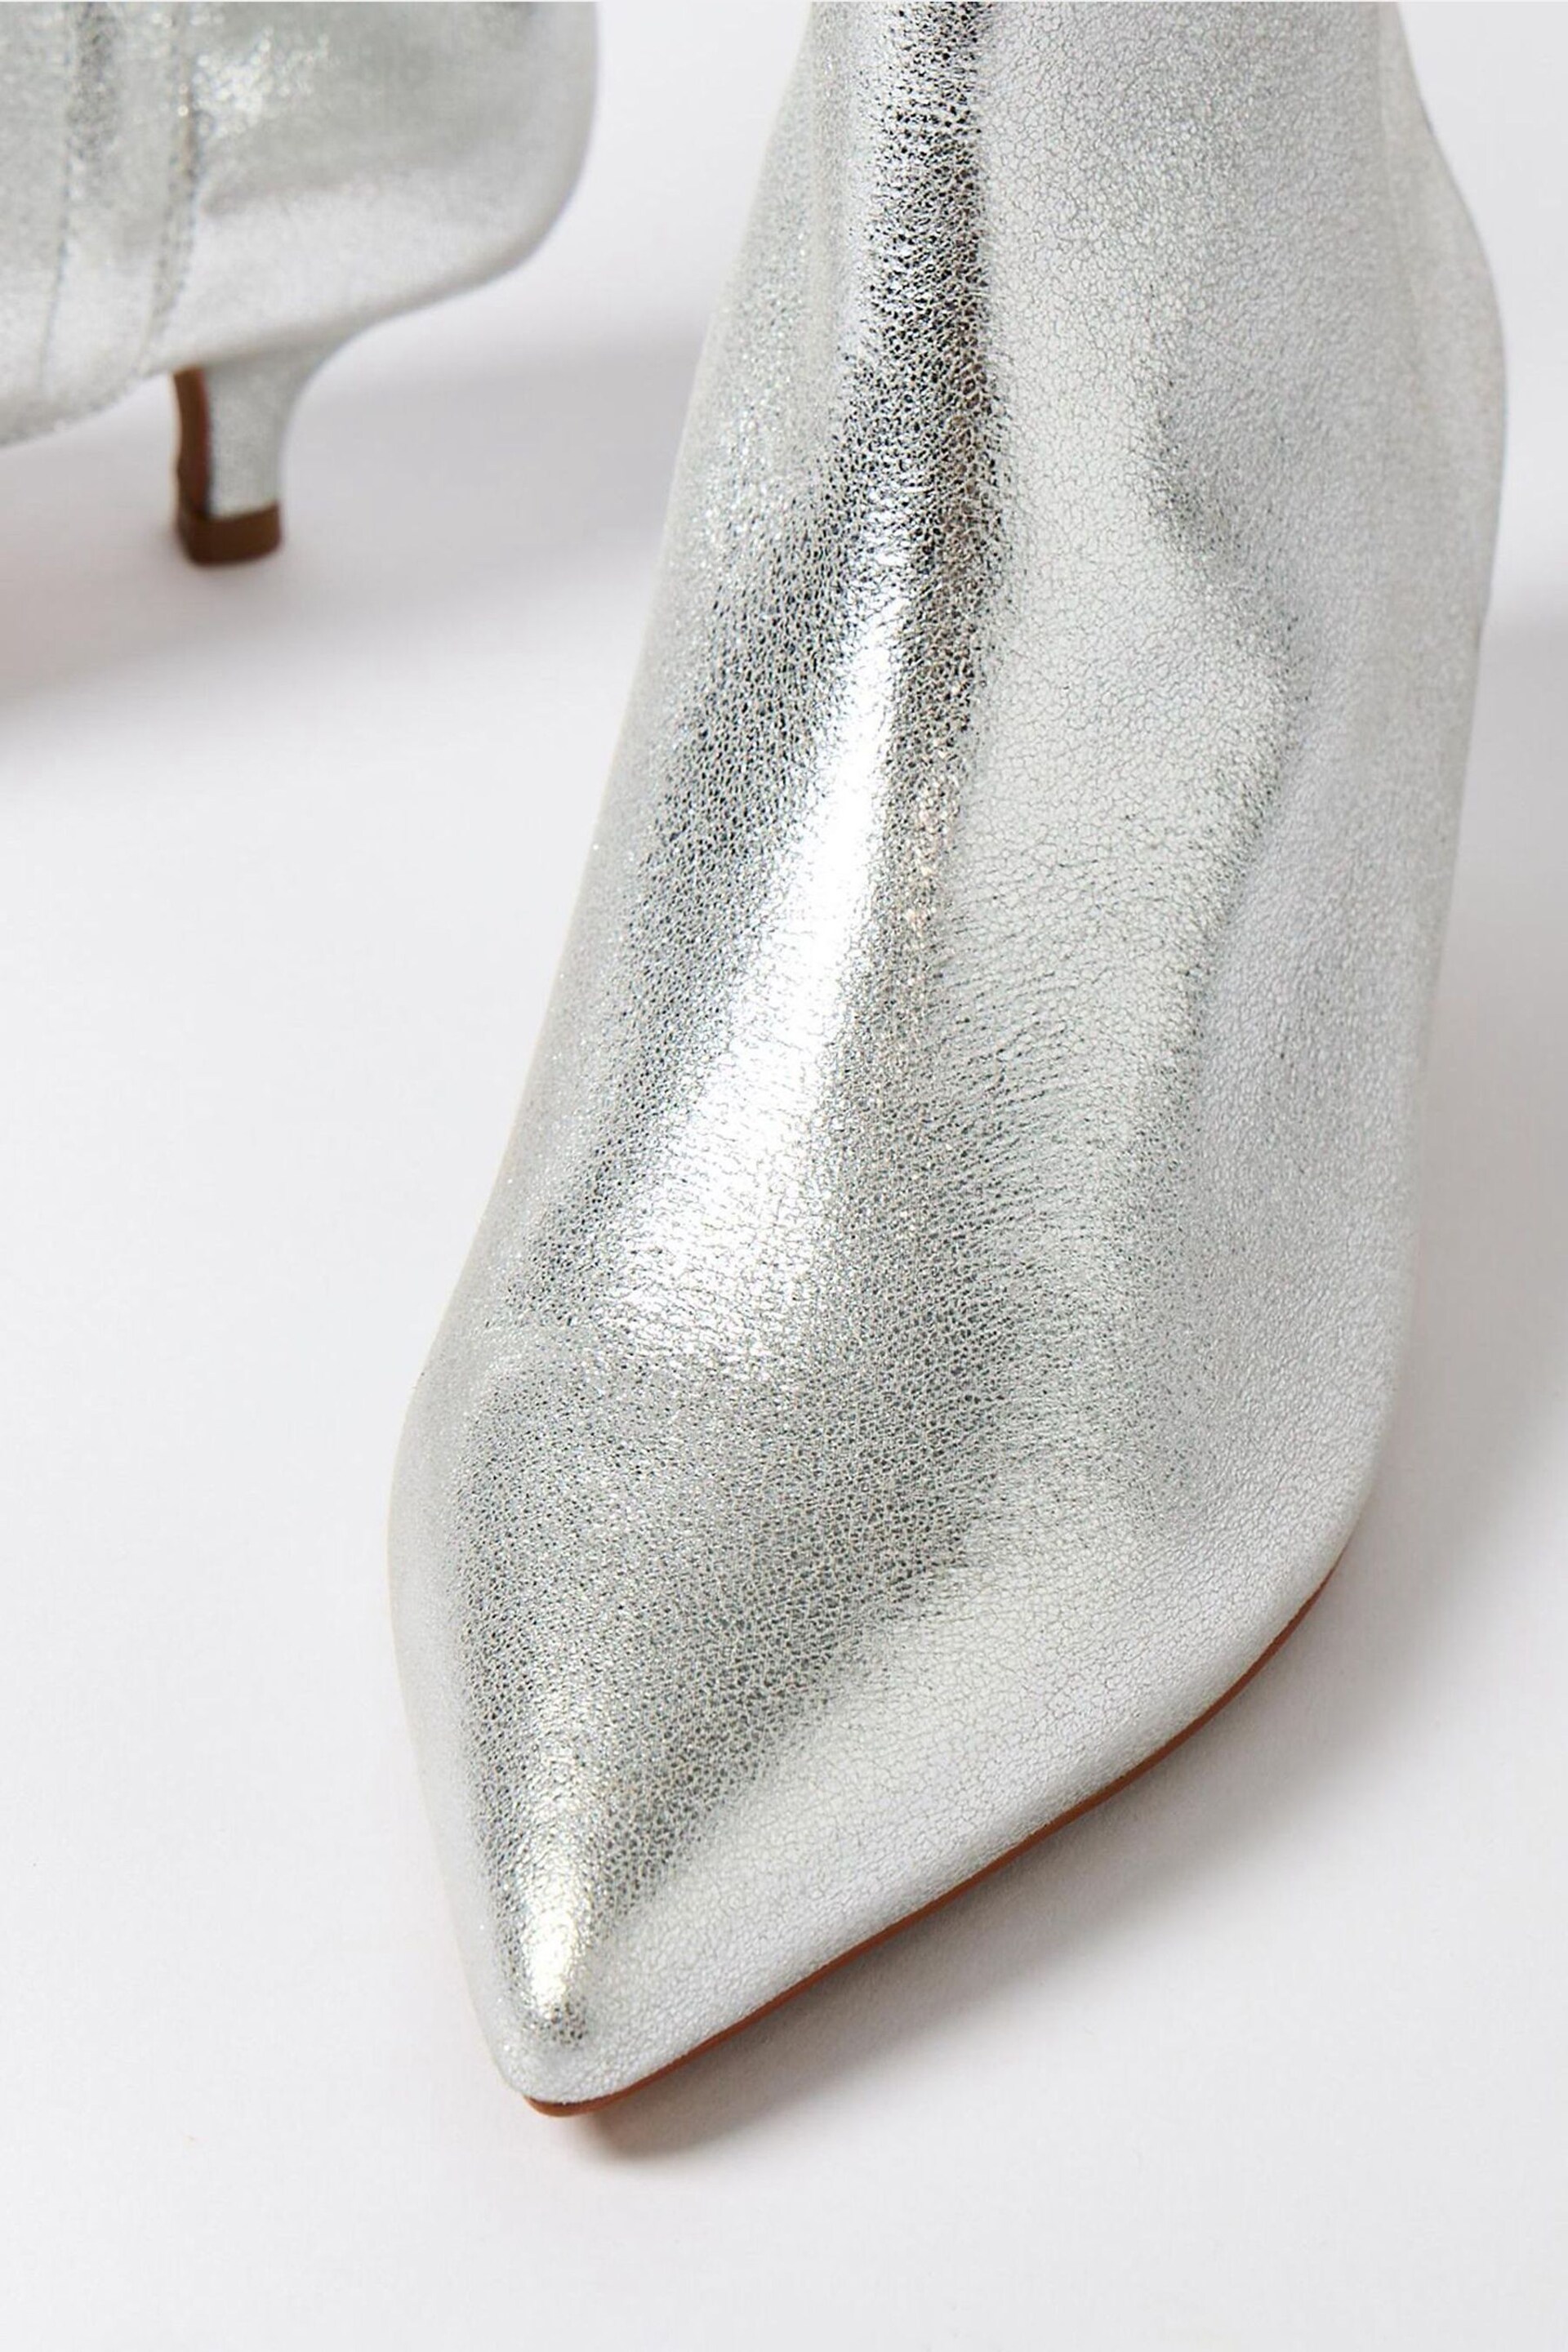 Oliver Bonas Silver Pointed Kitten Heel Leather Boots - Image 3 of 7